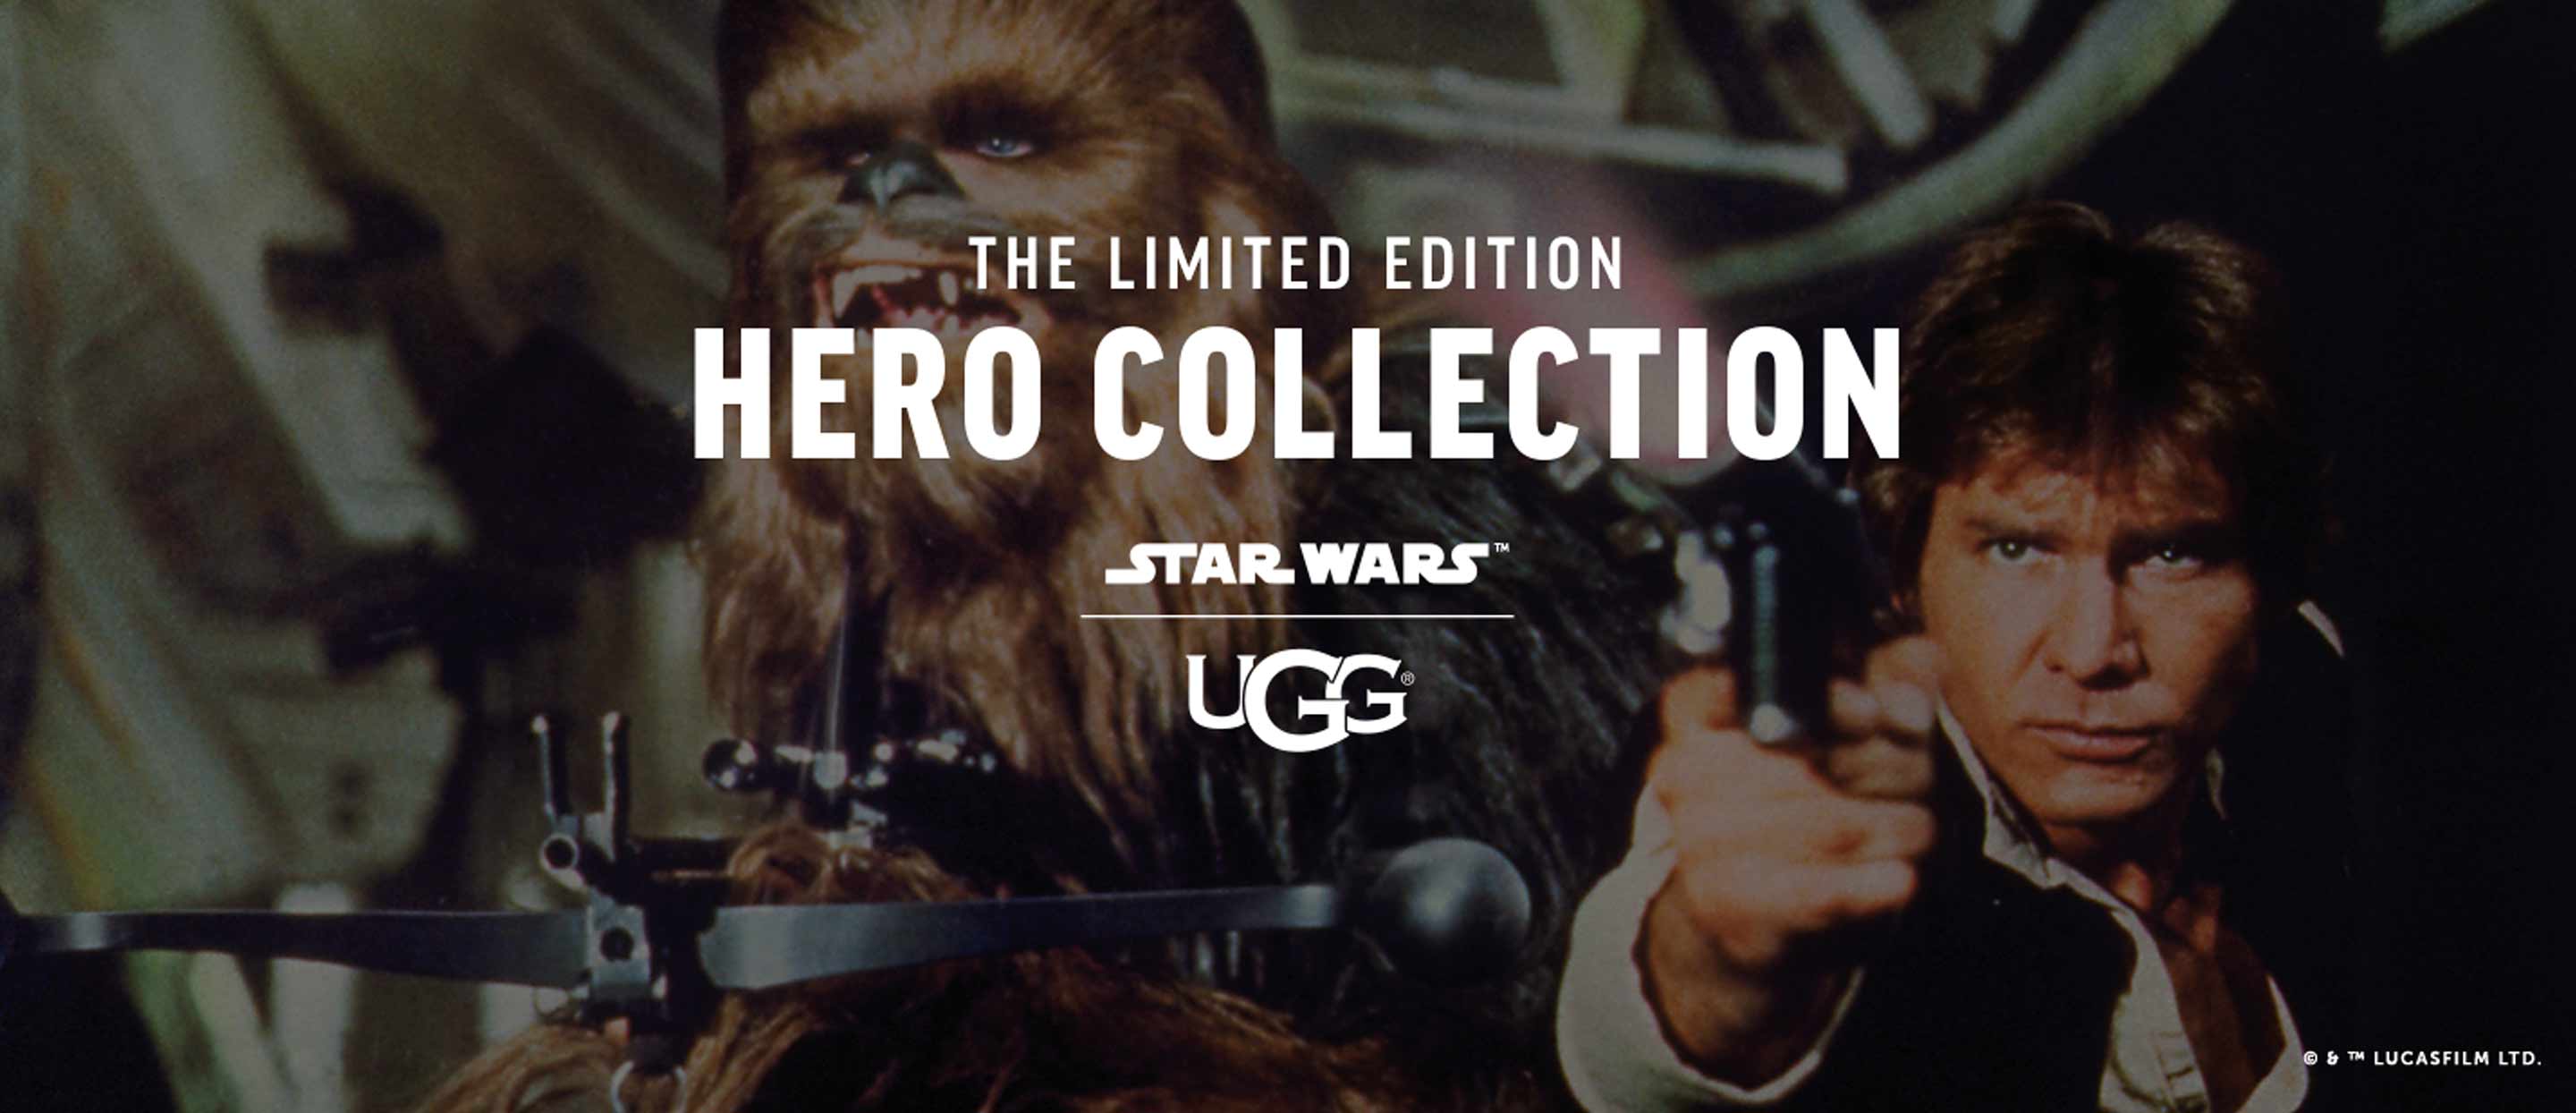 UGGS drop their Star Wars Inspired Collection